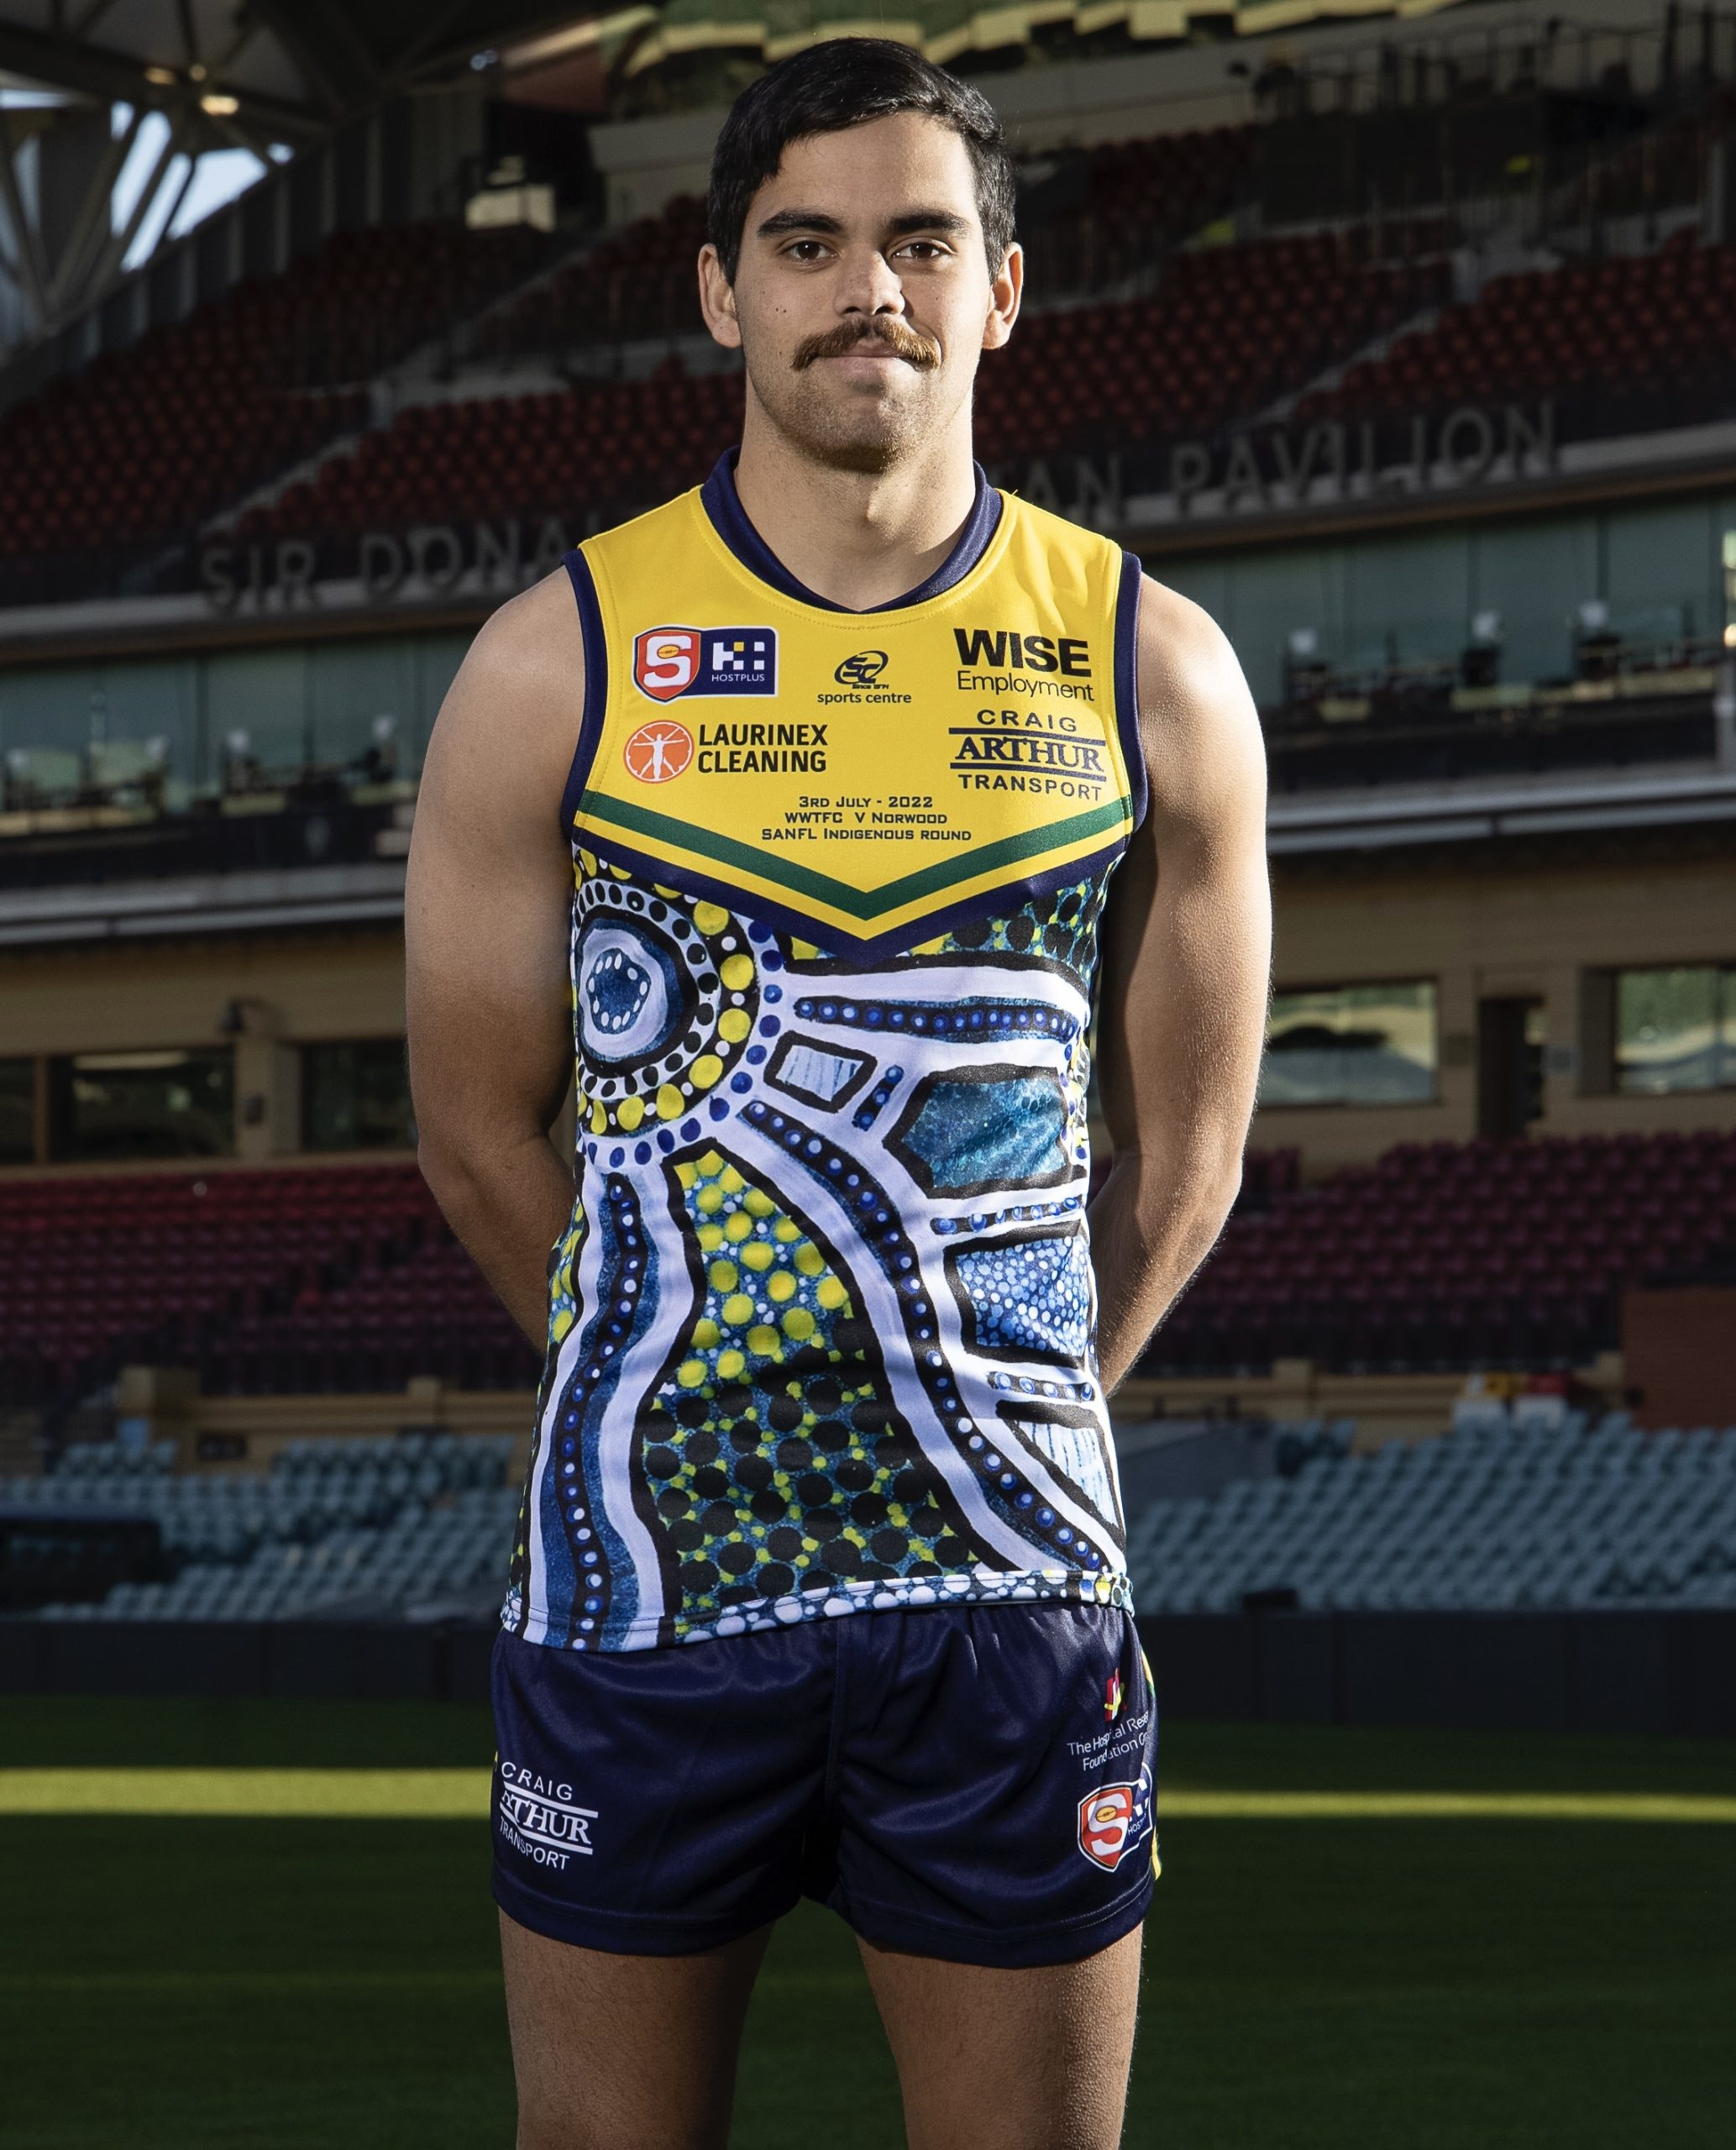 AFL 2019: Every club's Indigenous guernsey, photos, stories behind